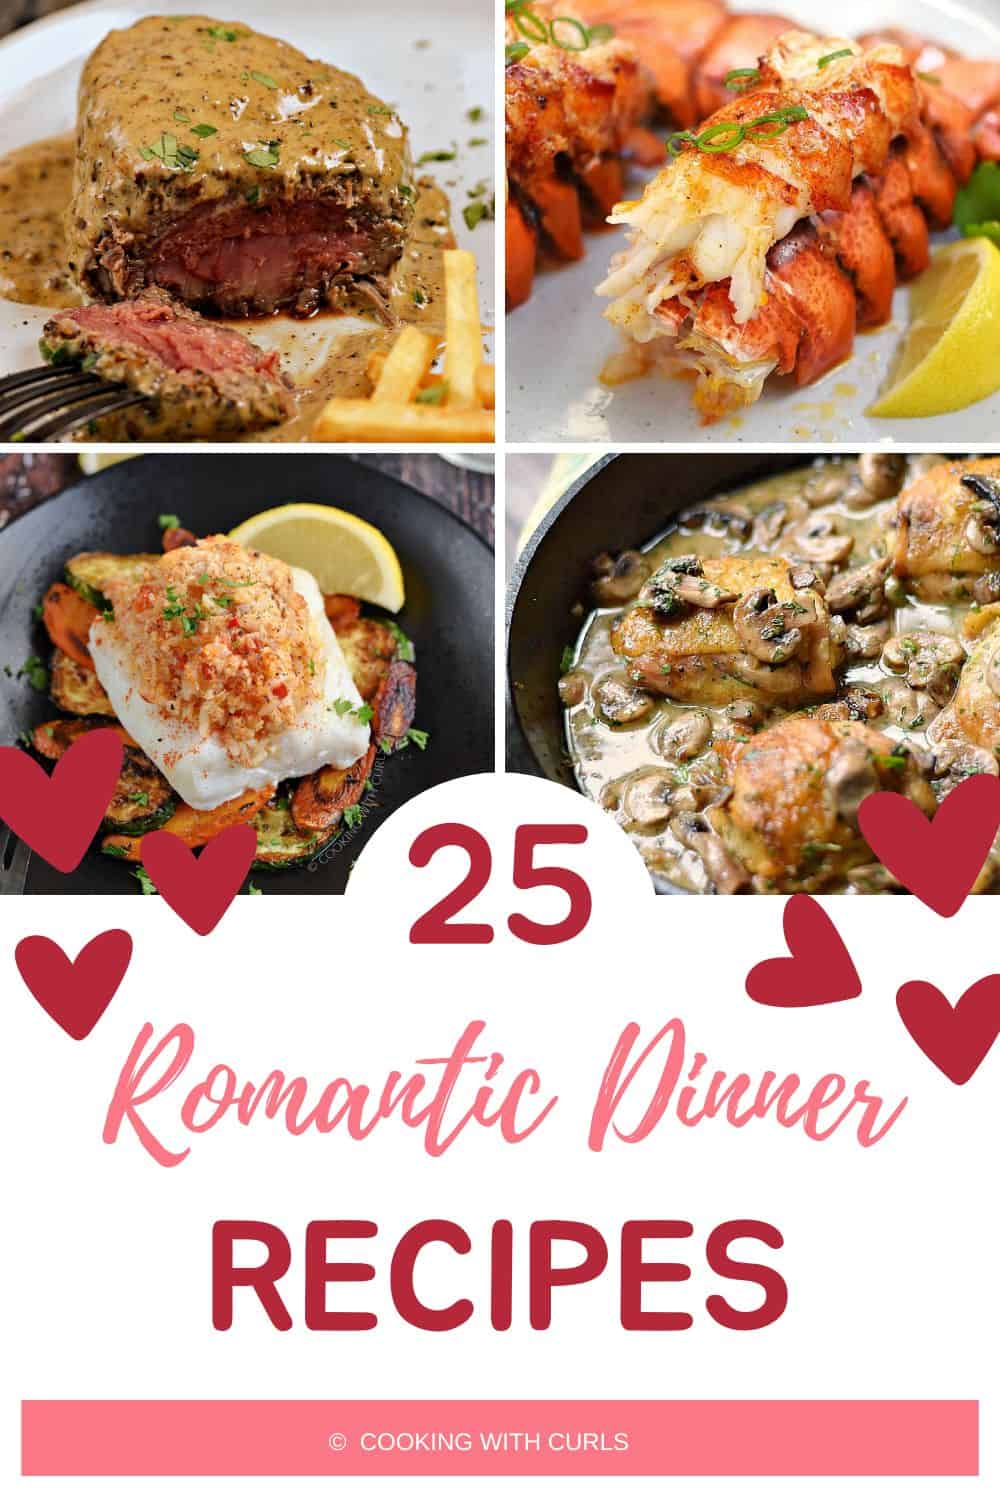 Four square images with 25 Romantic Dinner Recipes graphic across the bottom.